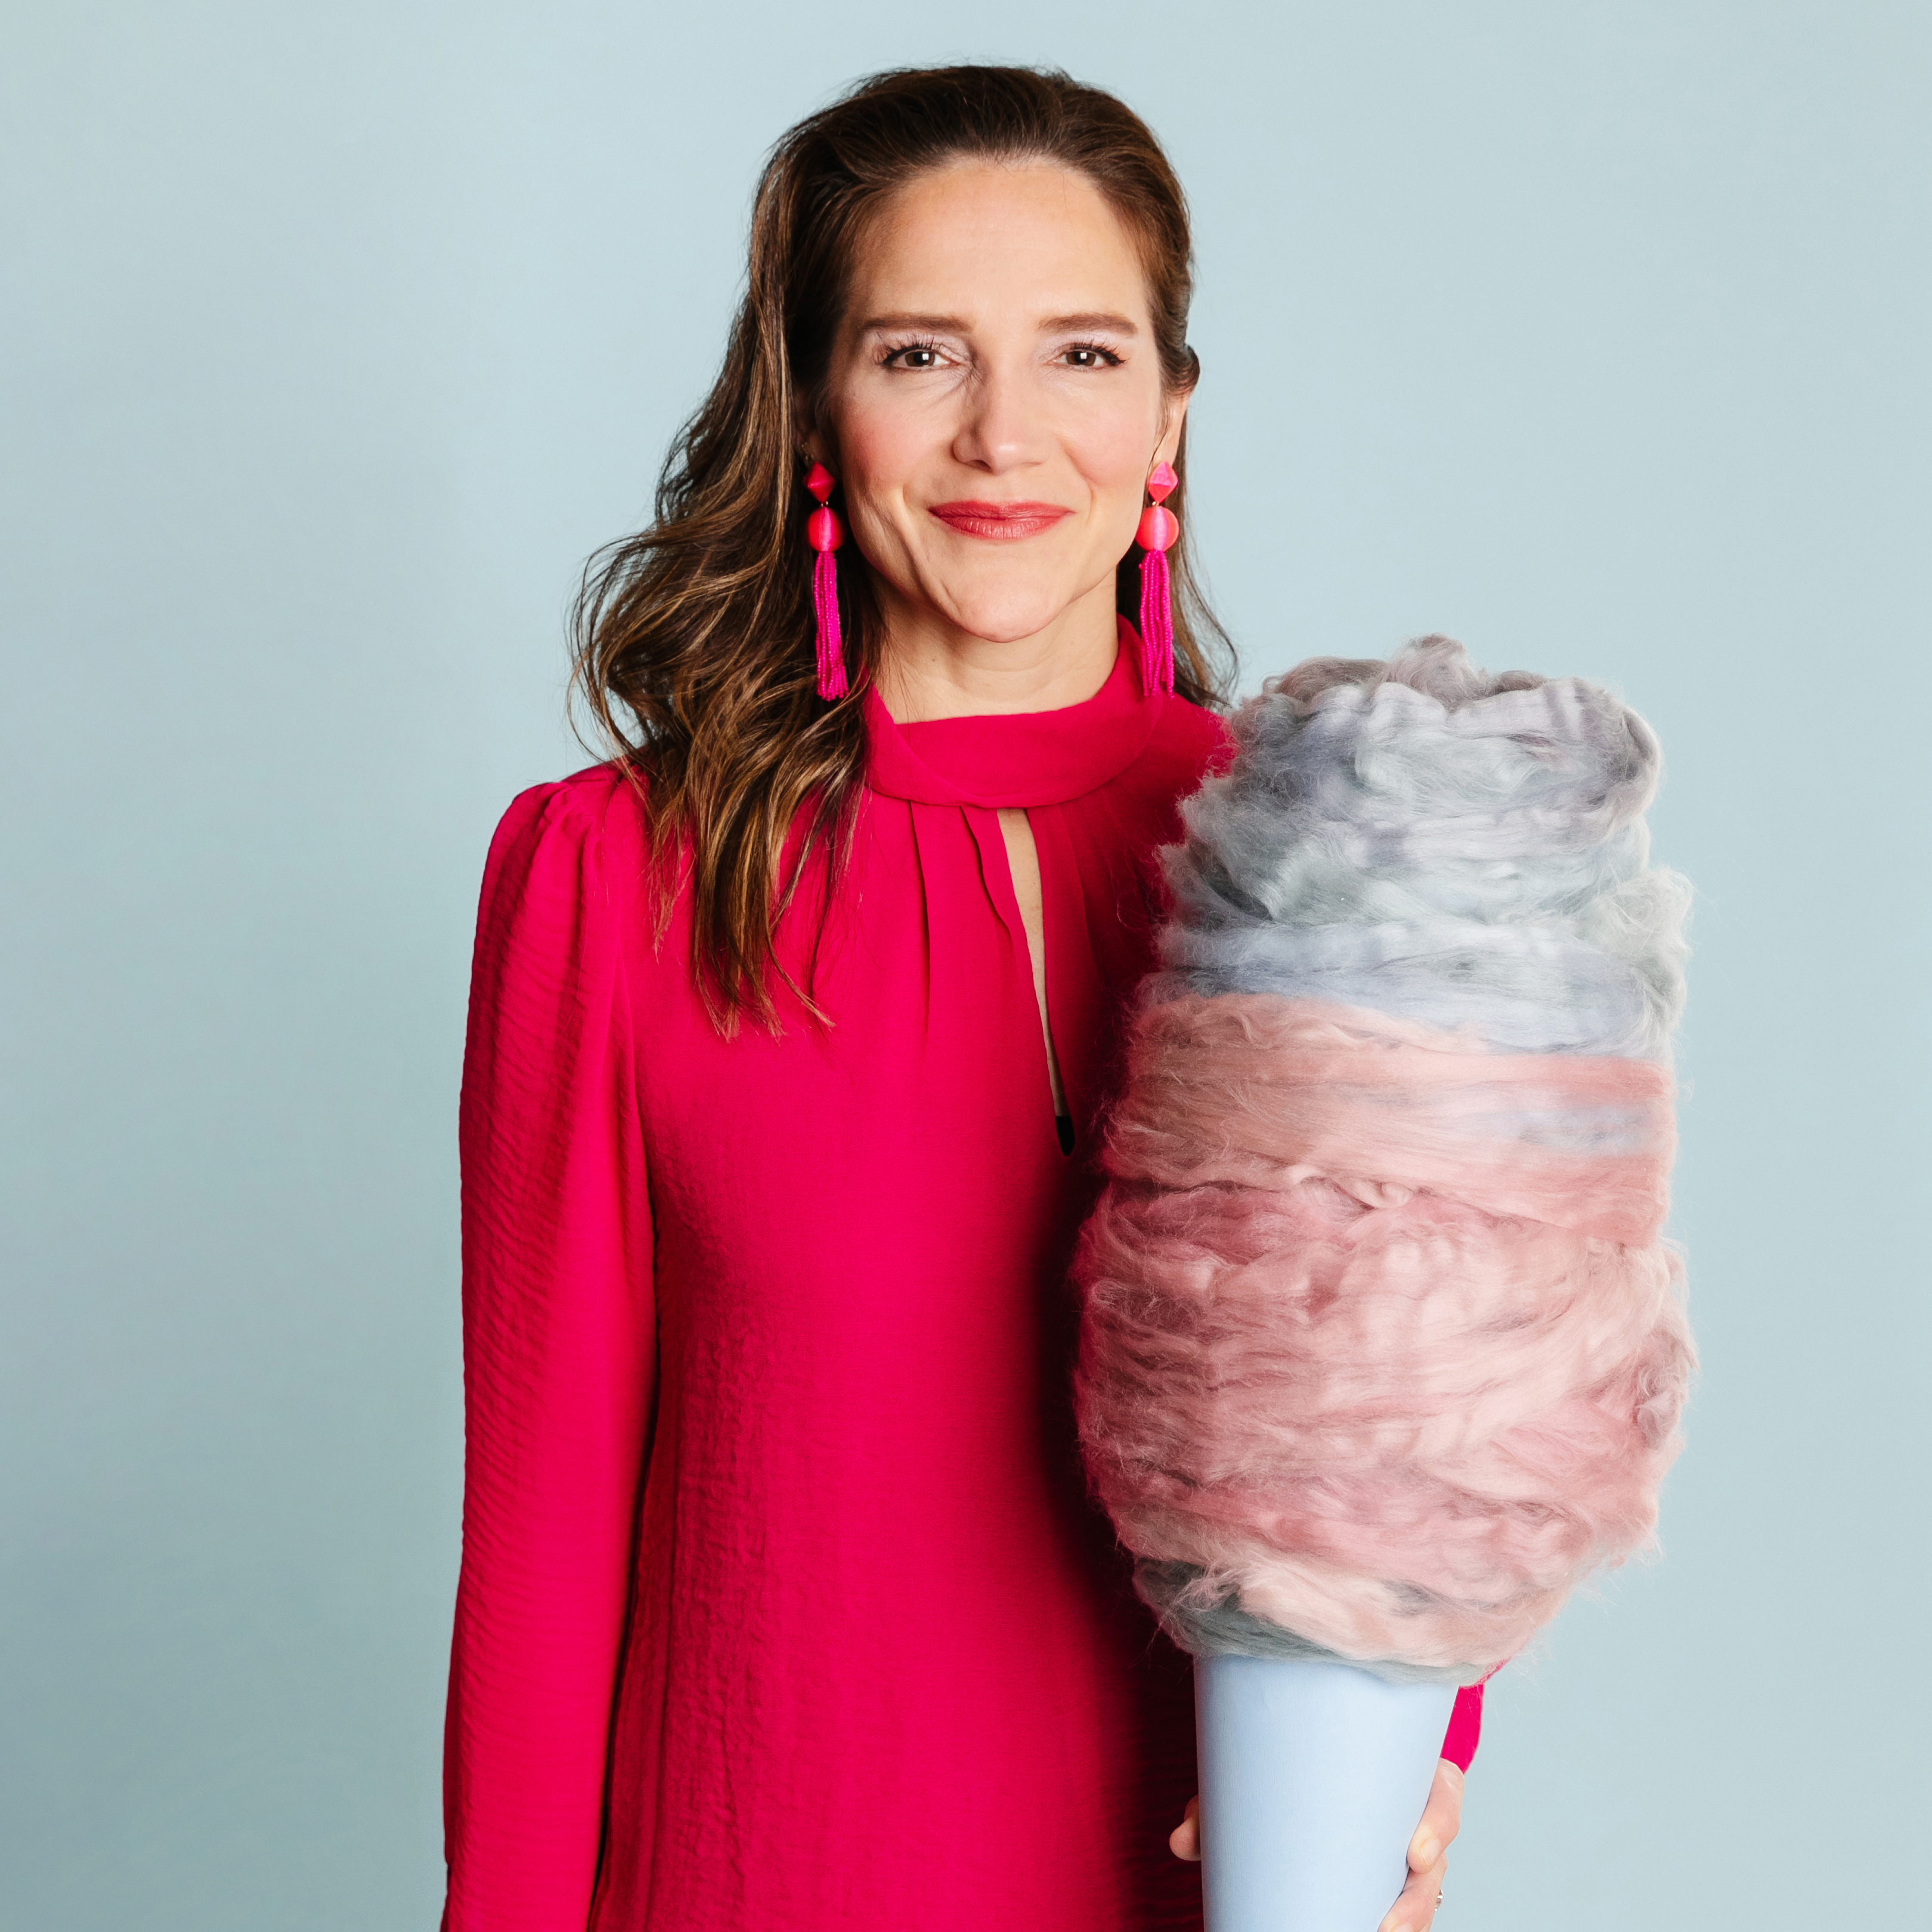 a person holding a cotton candy